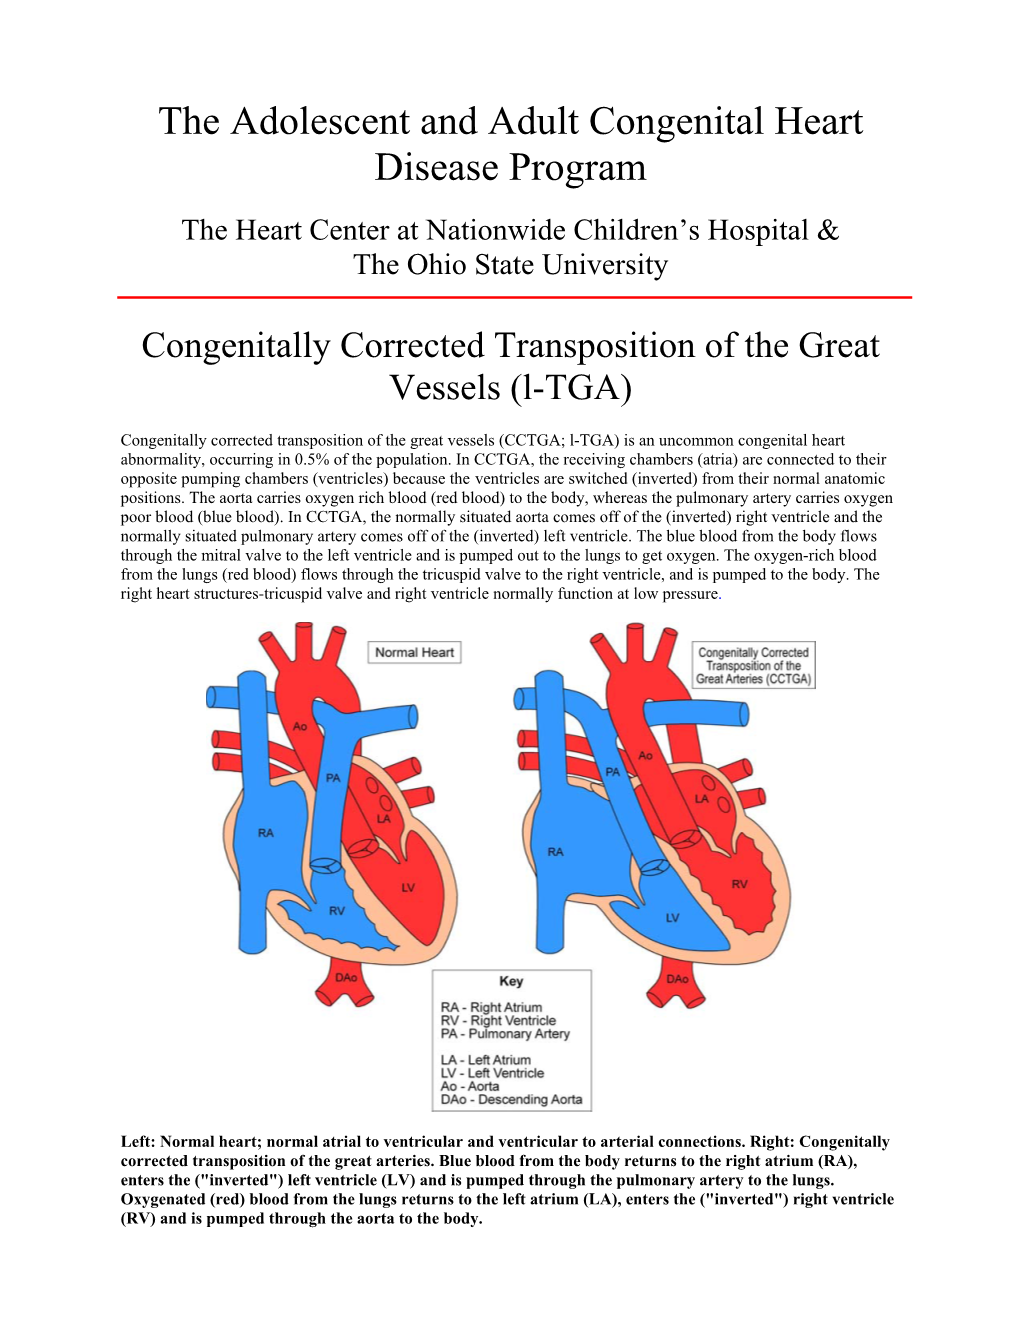 The Adolescent and Young Adult Congenital Heart Disease Program